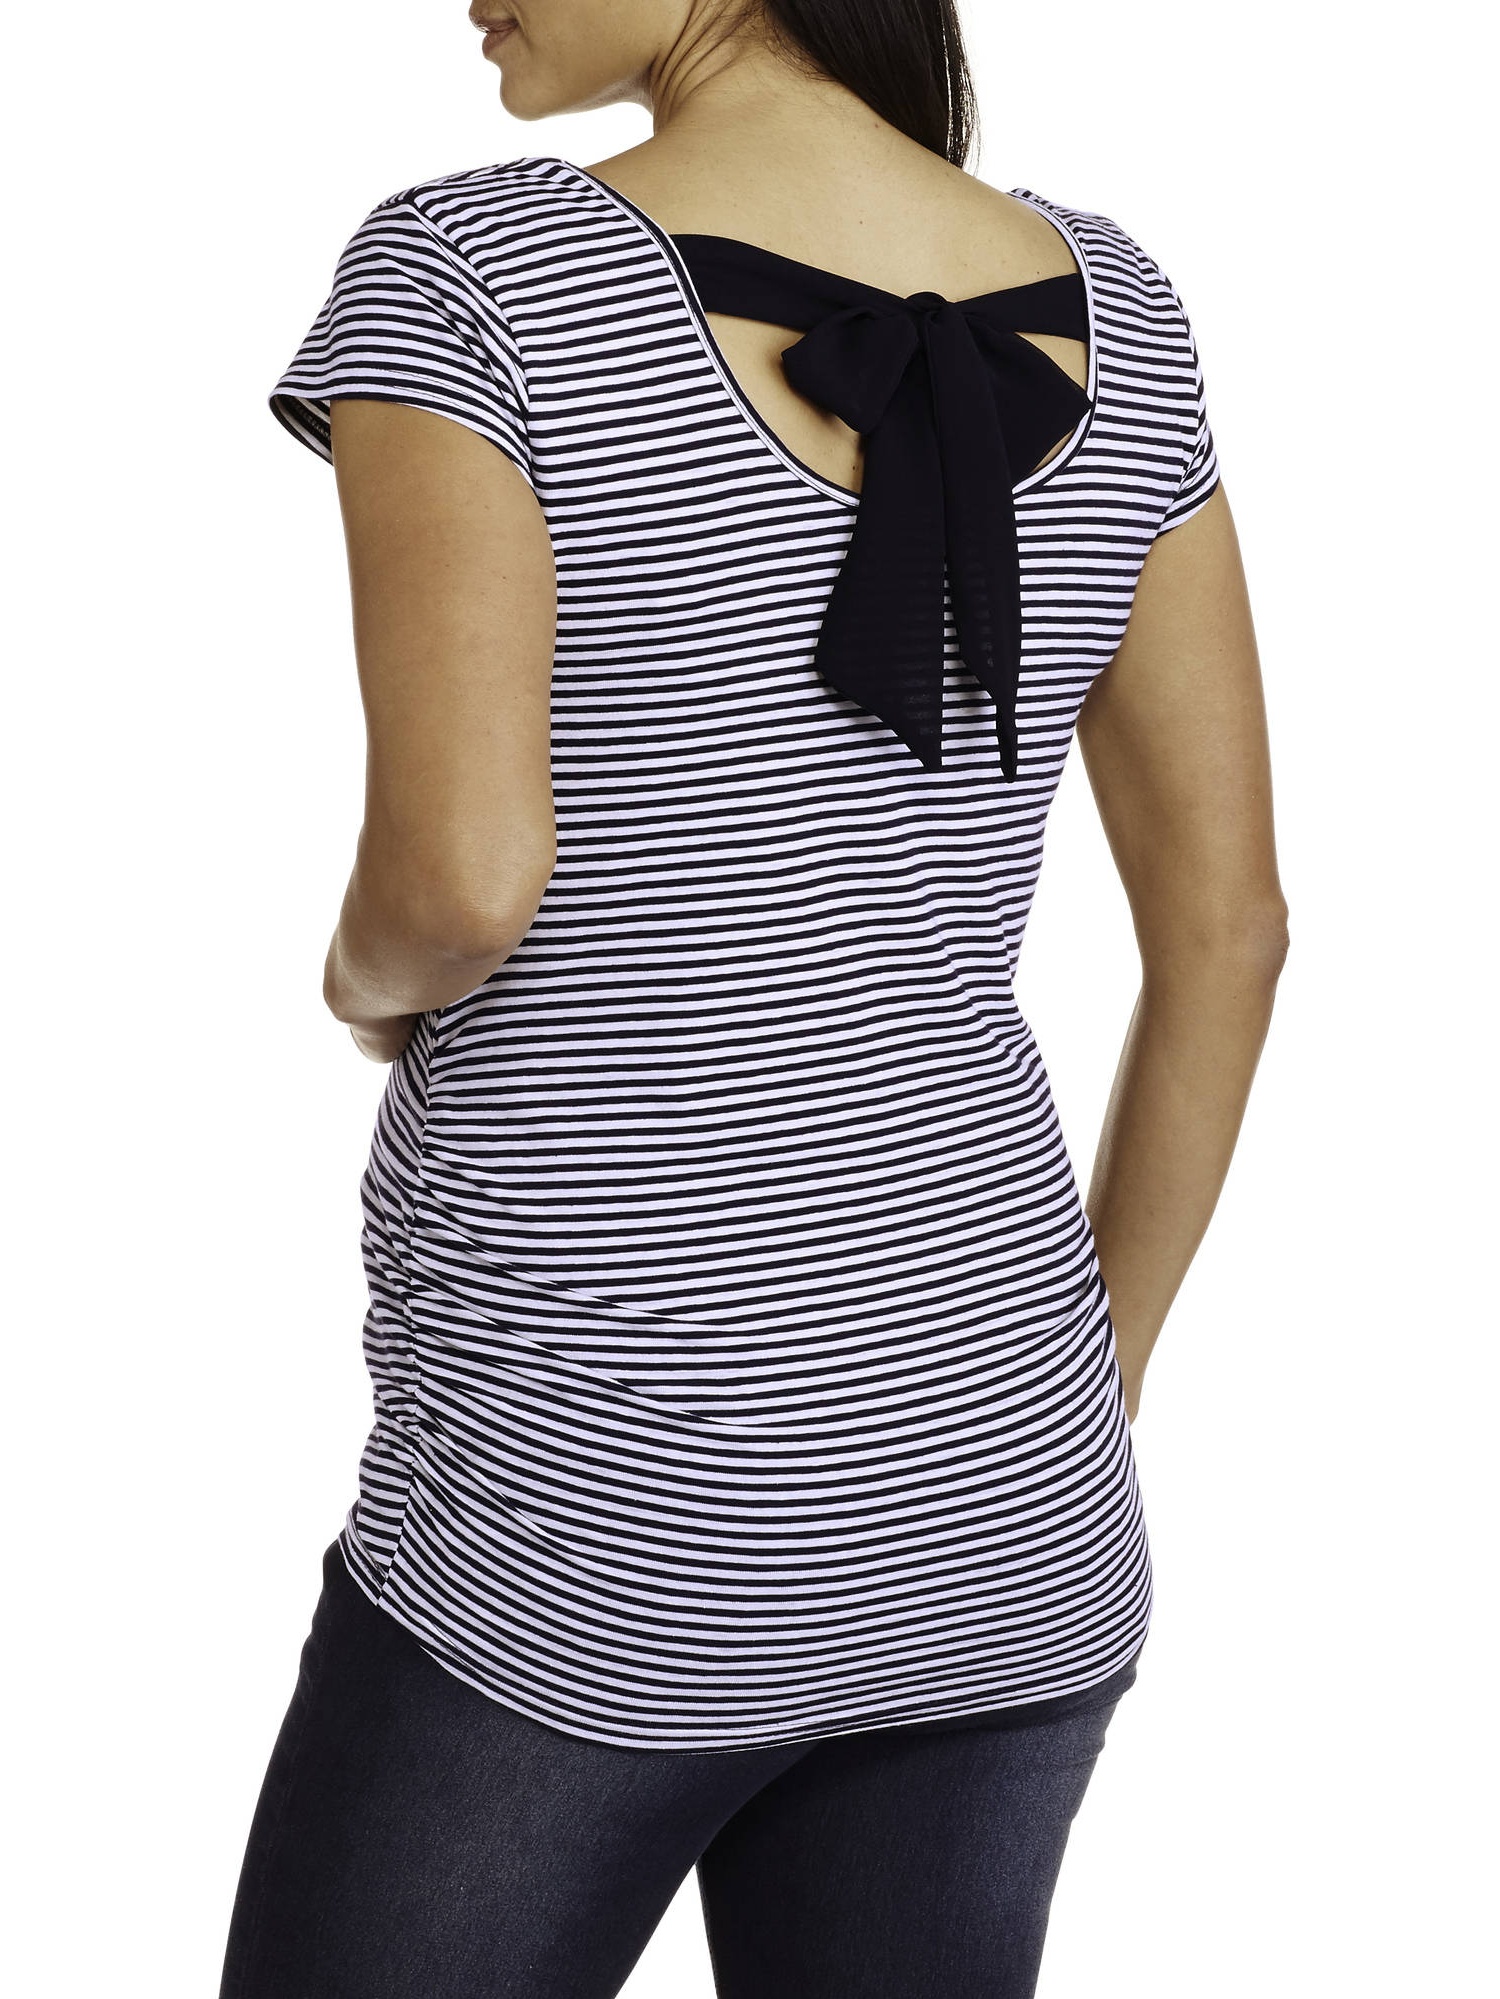 Maternity Short Sleeve Top with Bow Back - image 1 of 2